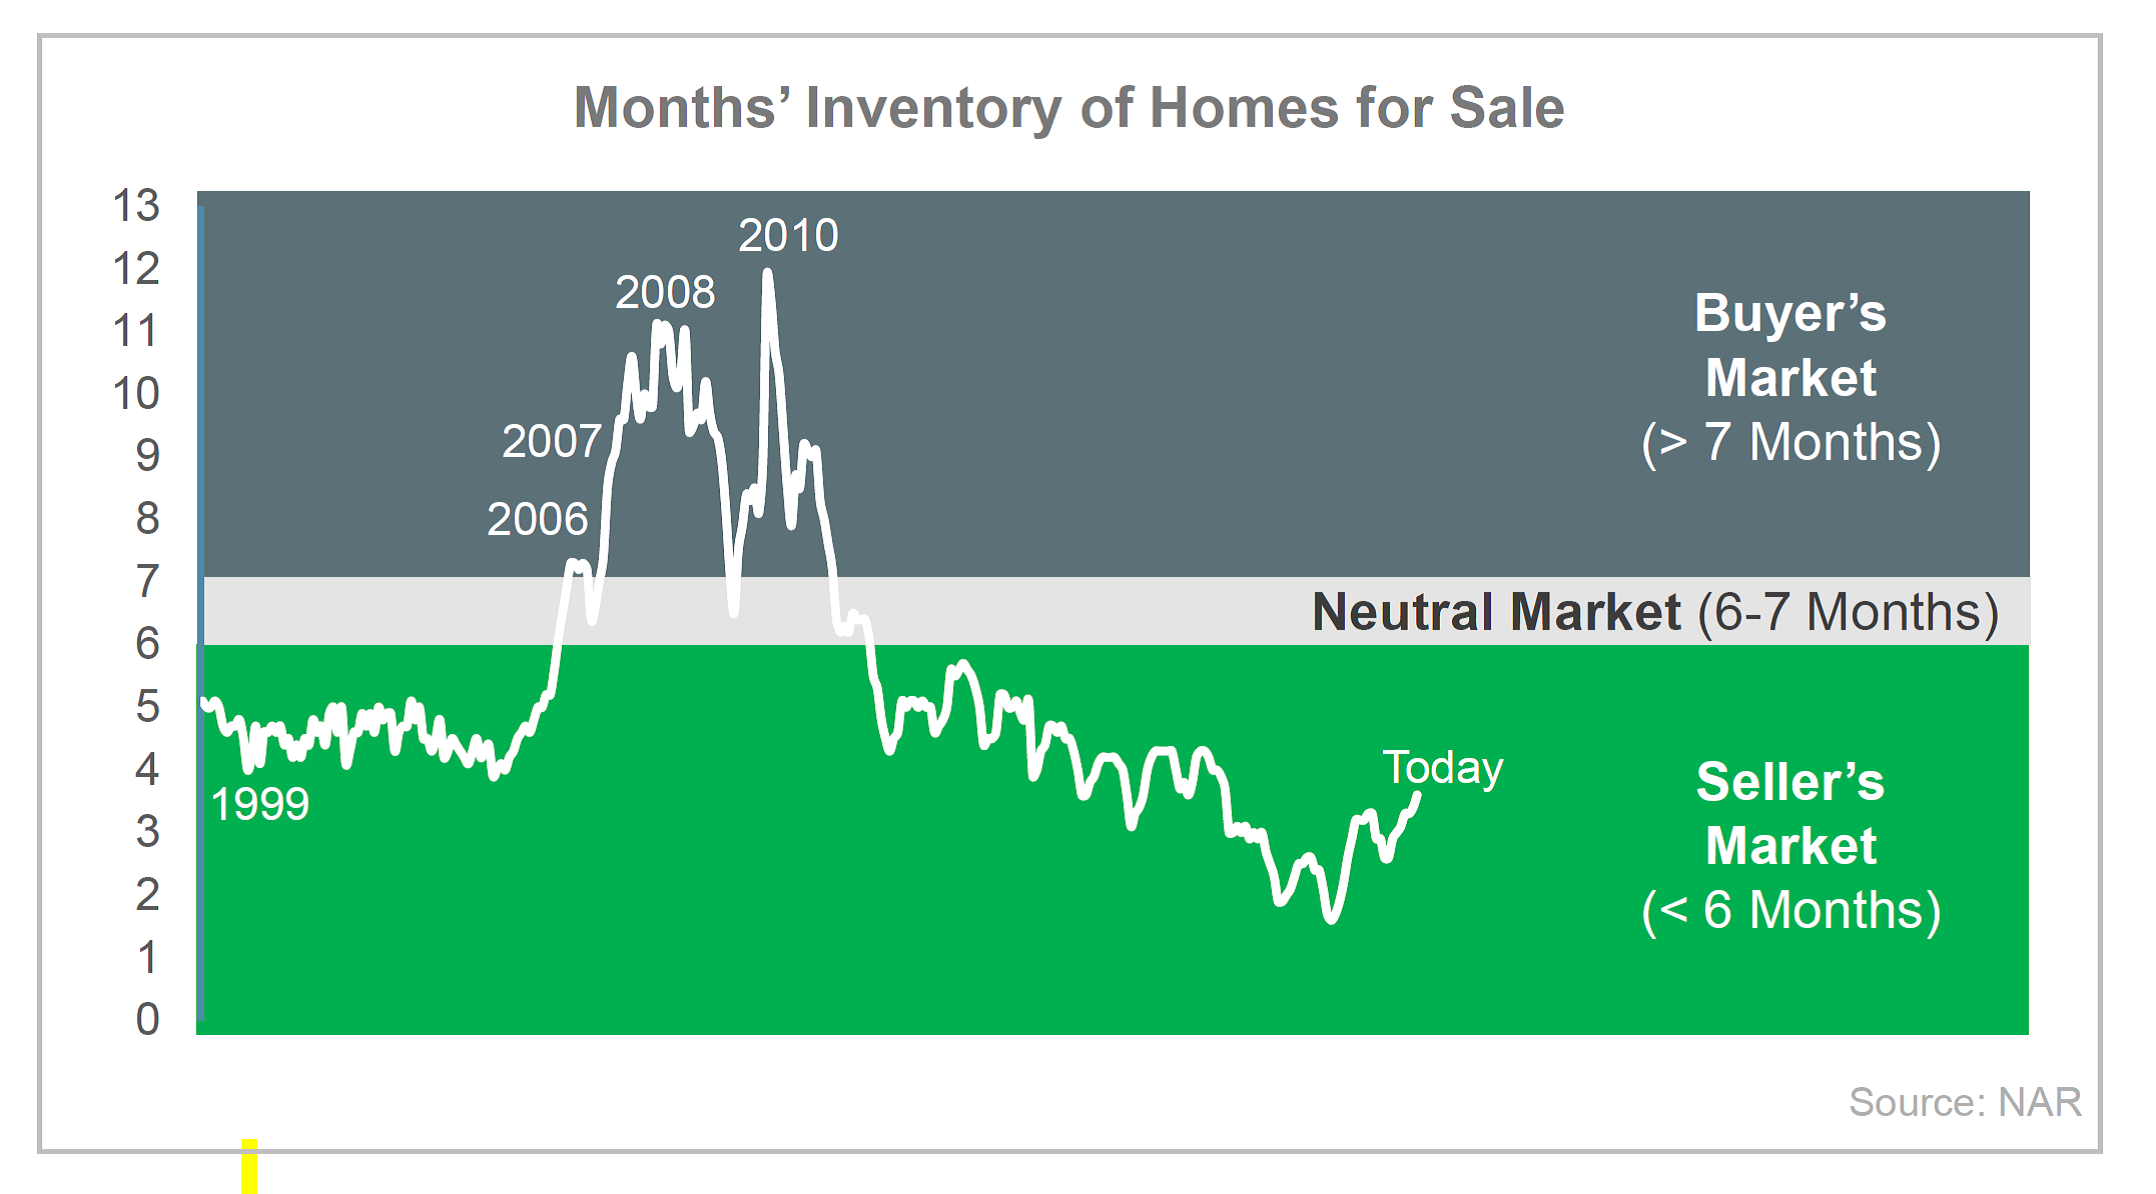 Months’ Inventory of Homes for Sale